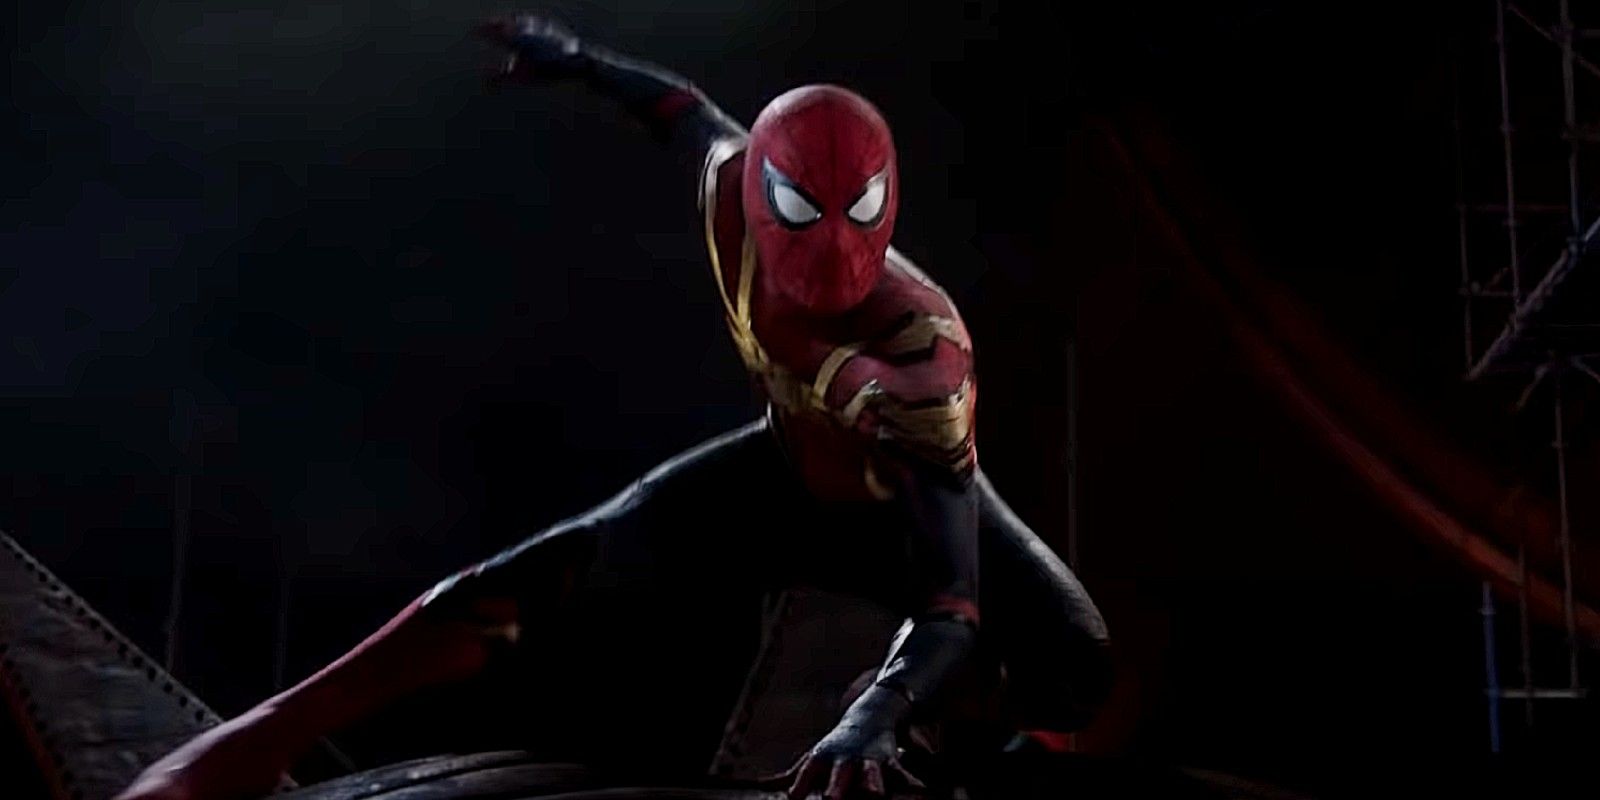 Spider-Man stands ready to fight in the integrated suit in Spider-Man: No Way Home